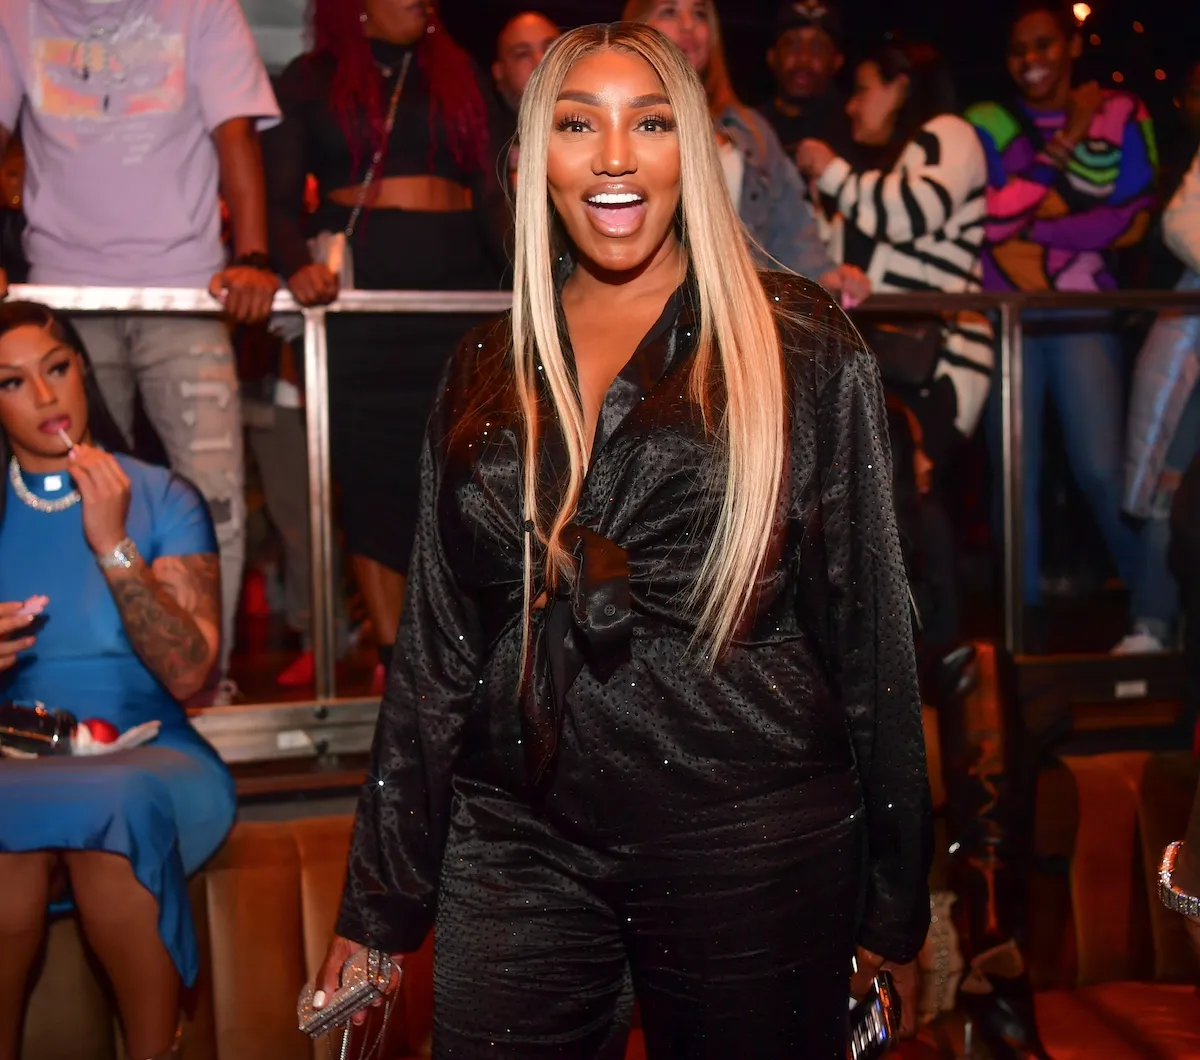 Smiling NeNe Leakes of 'The Real Housewives of Atlanta' dressed in balck